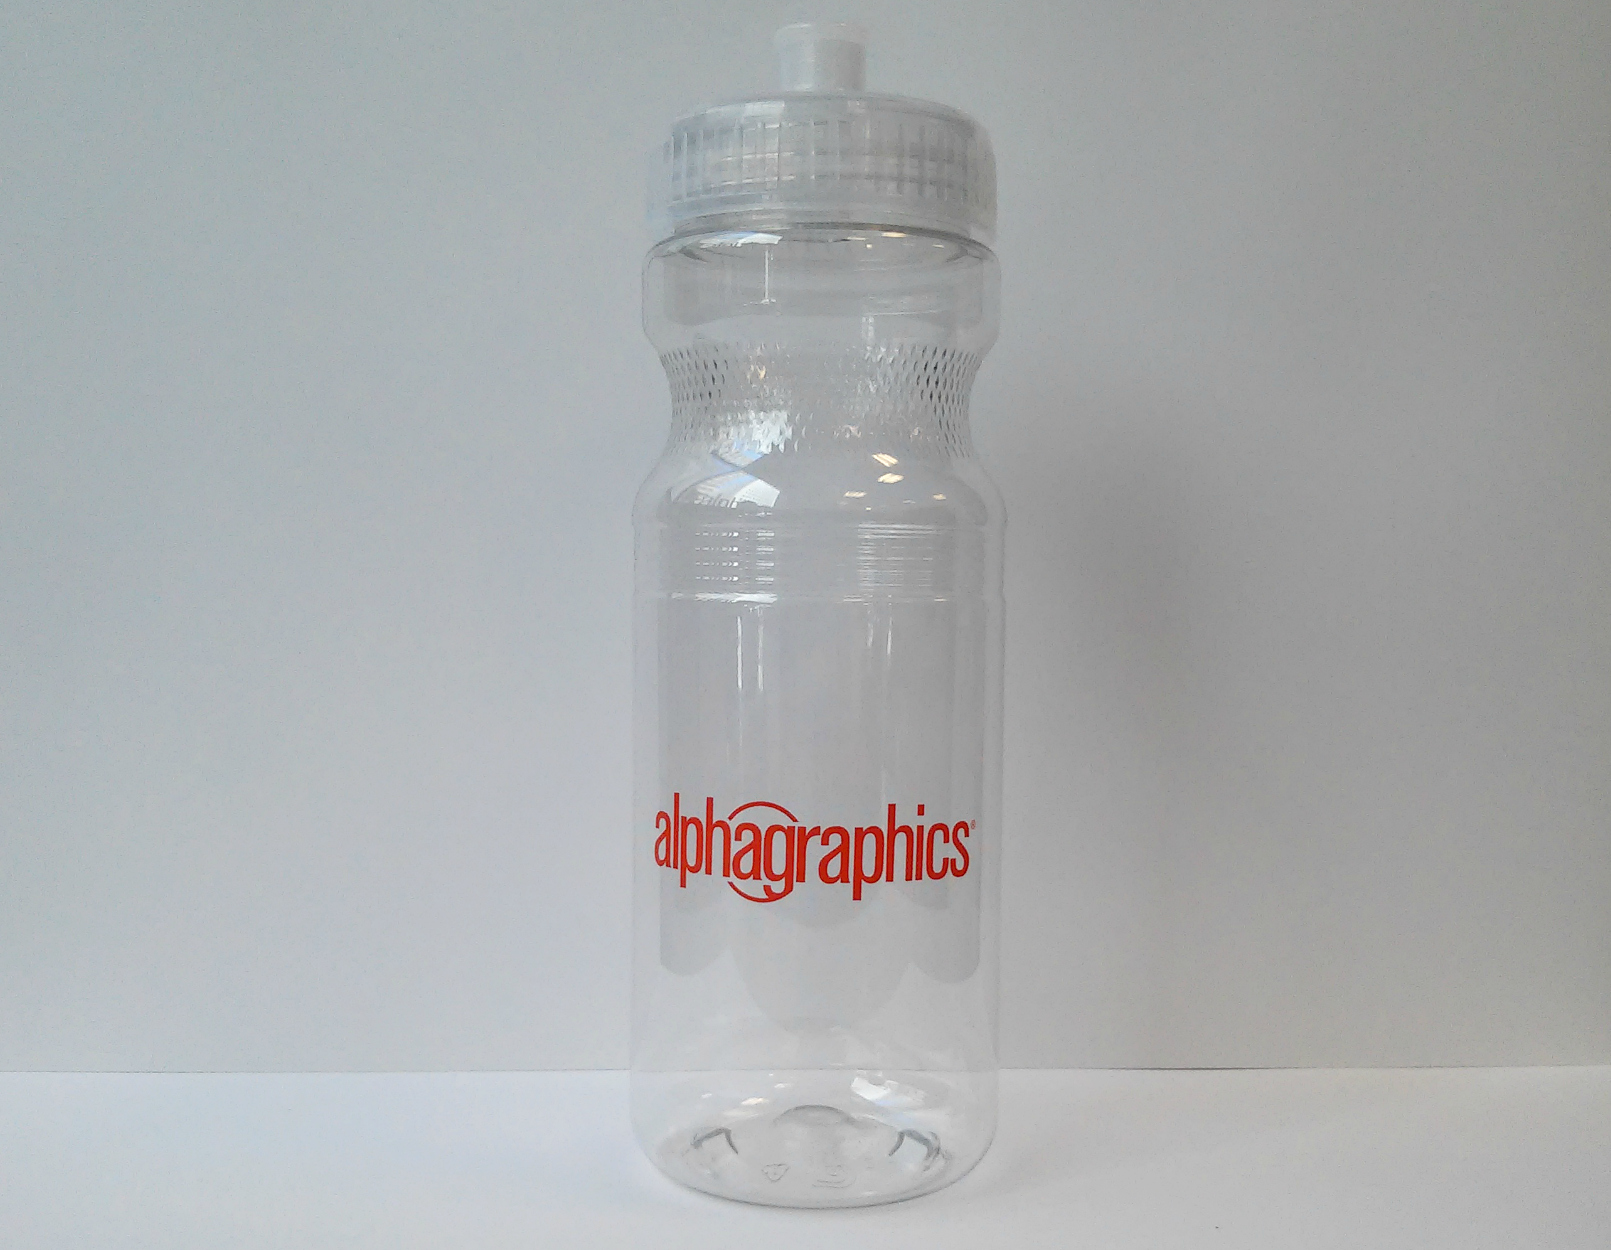 Alphagraphics san francisco promo products water bottle